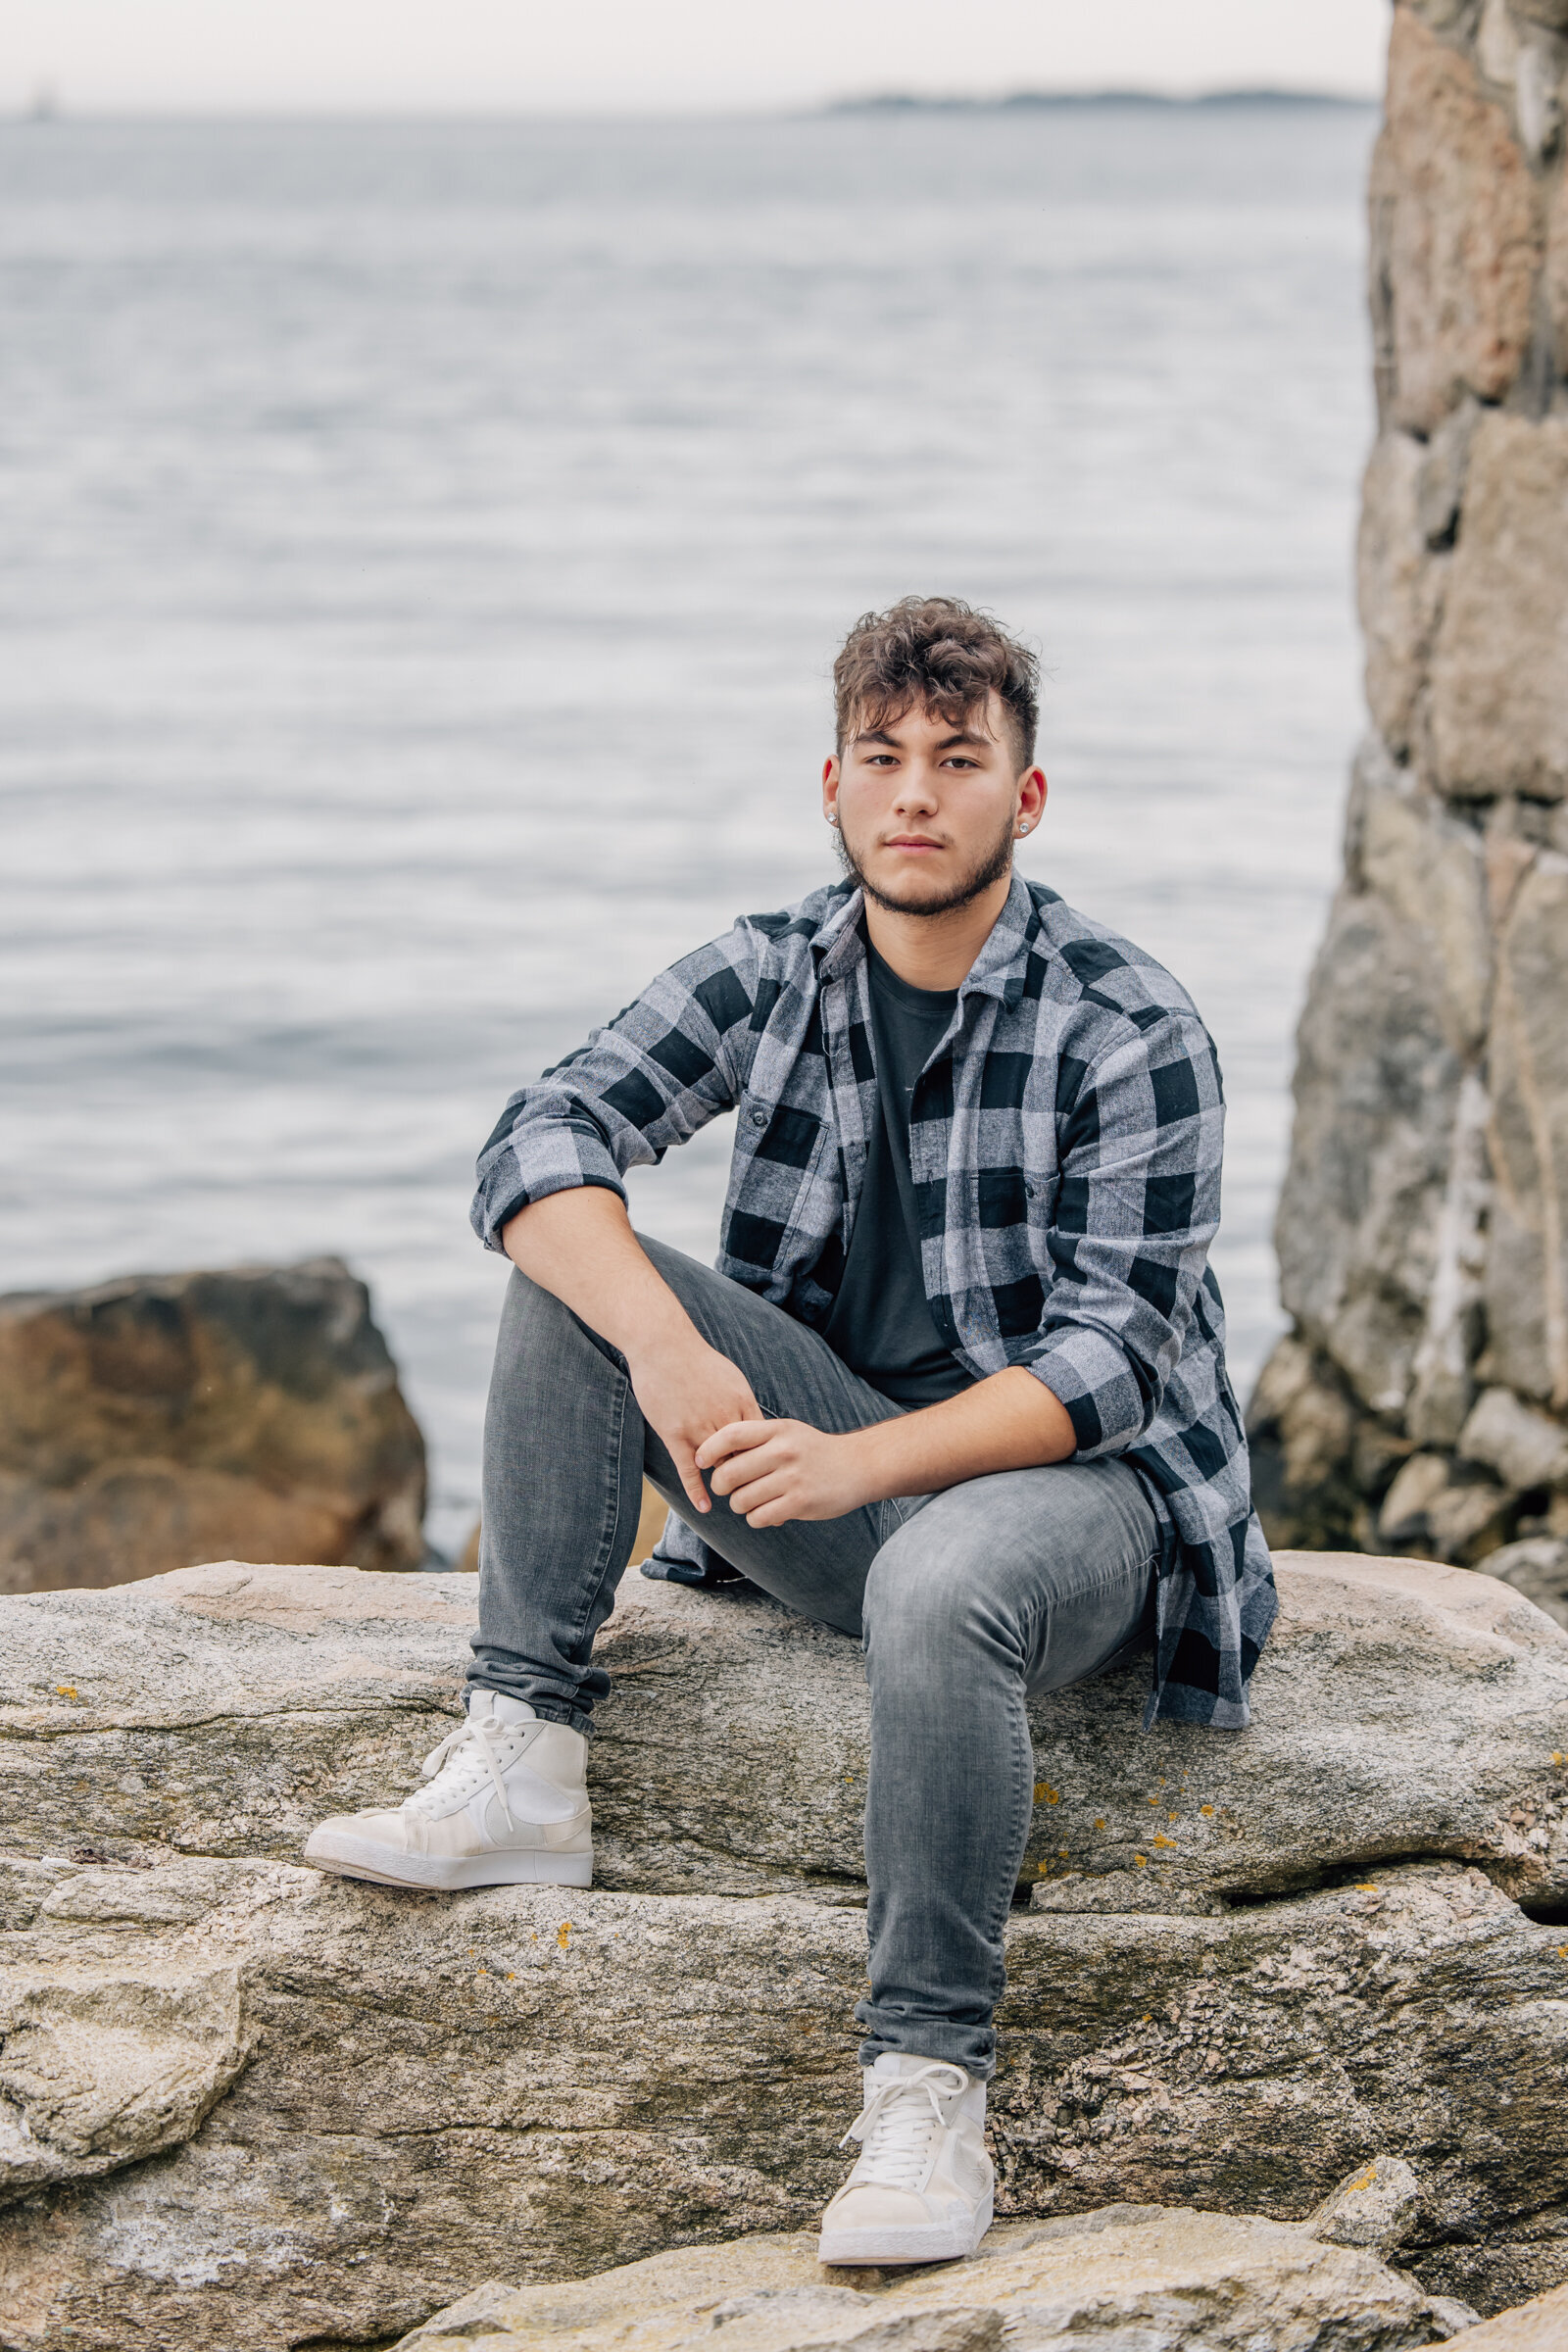 high school senior boy with dark hair looking at camera in front of water at ender's island in connecticut